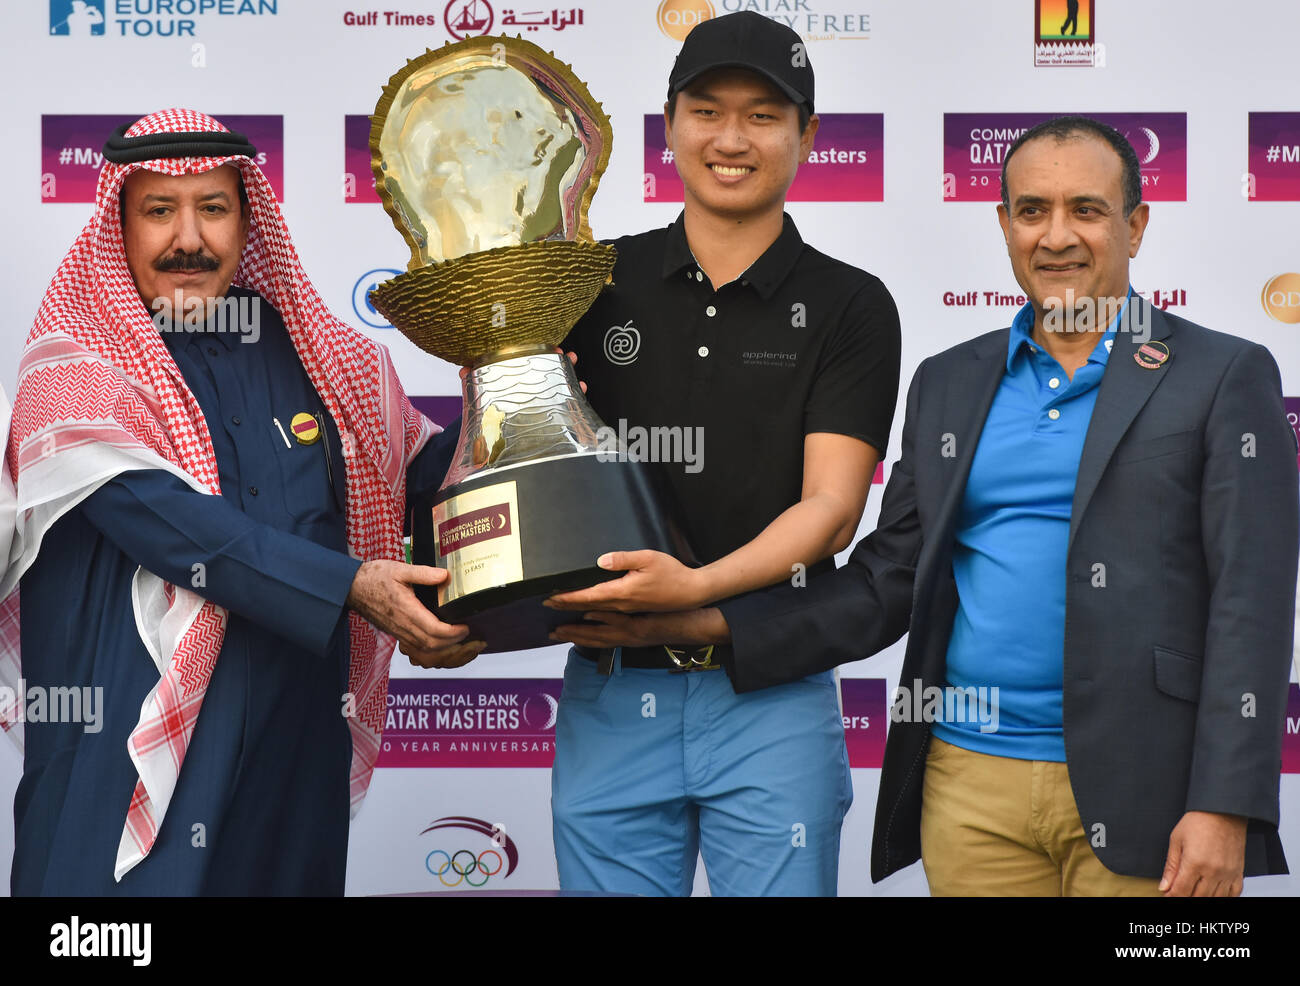 Doha, Qatar. 29th Jan, 2017. Wang Jeunghun (C) of South Korea receives his winners trophy from the President of the Qatar Golf Association Hassan Al Naimi (L) and the CEO of Commercial Bank Joseph Abraham following his victory in the playoff after the final round of the Qatar Masters golf tournament at the Doha Golf Club in Doha, capital of Qatar, Jan. 29, 2017. Wang Jeunghun claimed the title. Credit: Nikku/Xinhua/Alamy Live News Stock Photo